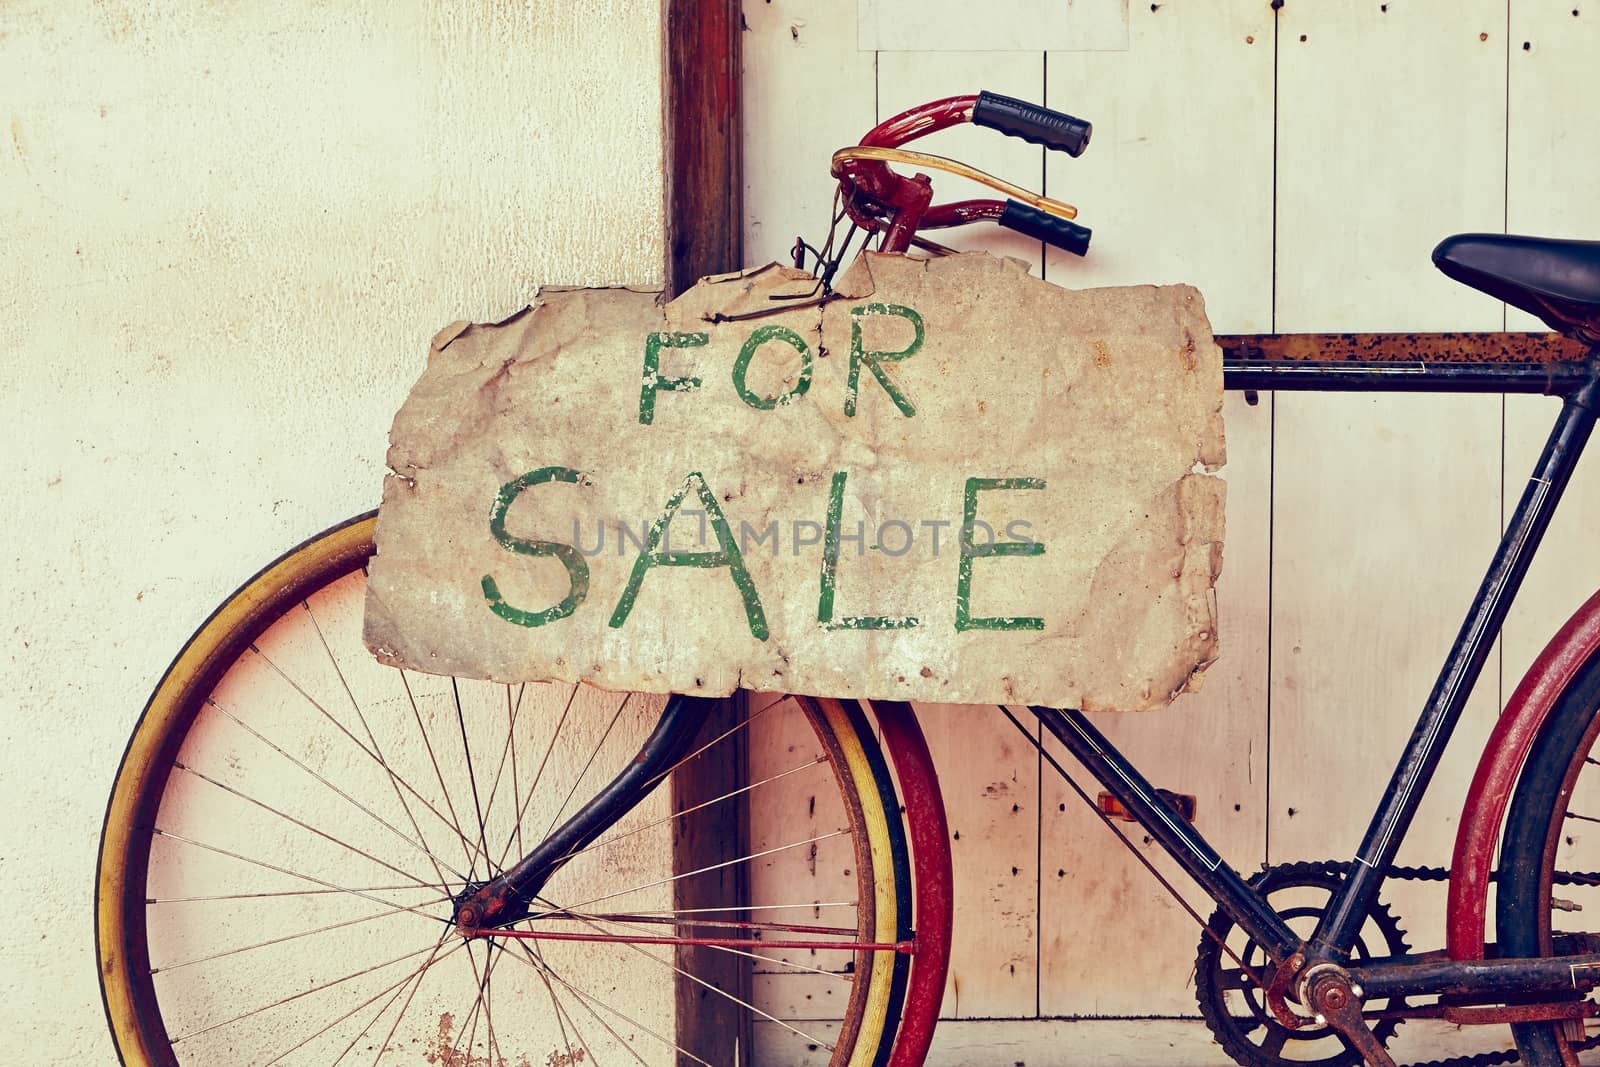 Abandoned bicycle for sale - retro color